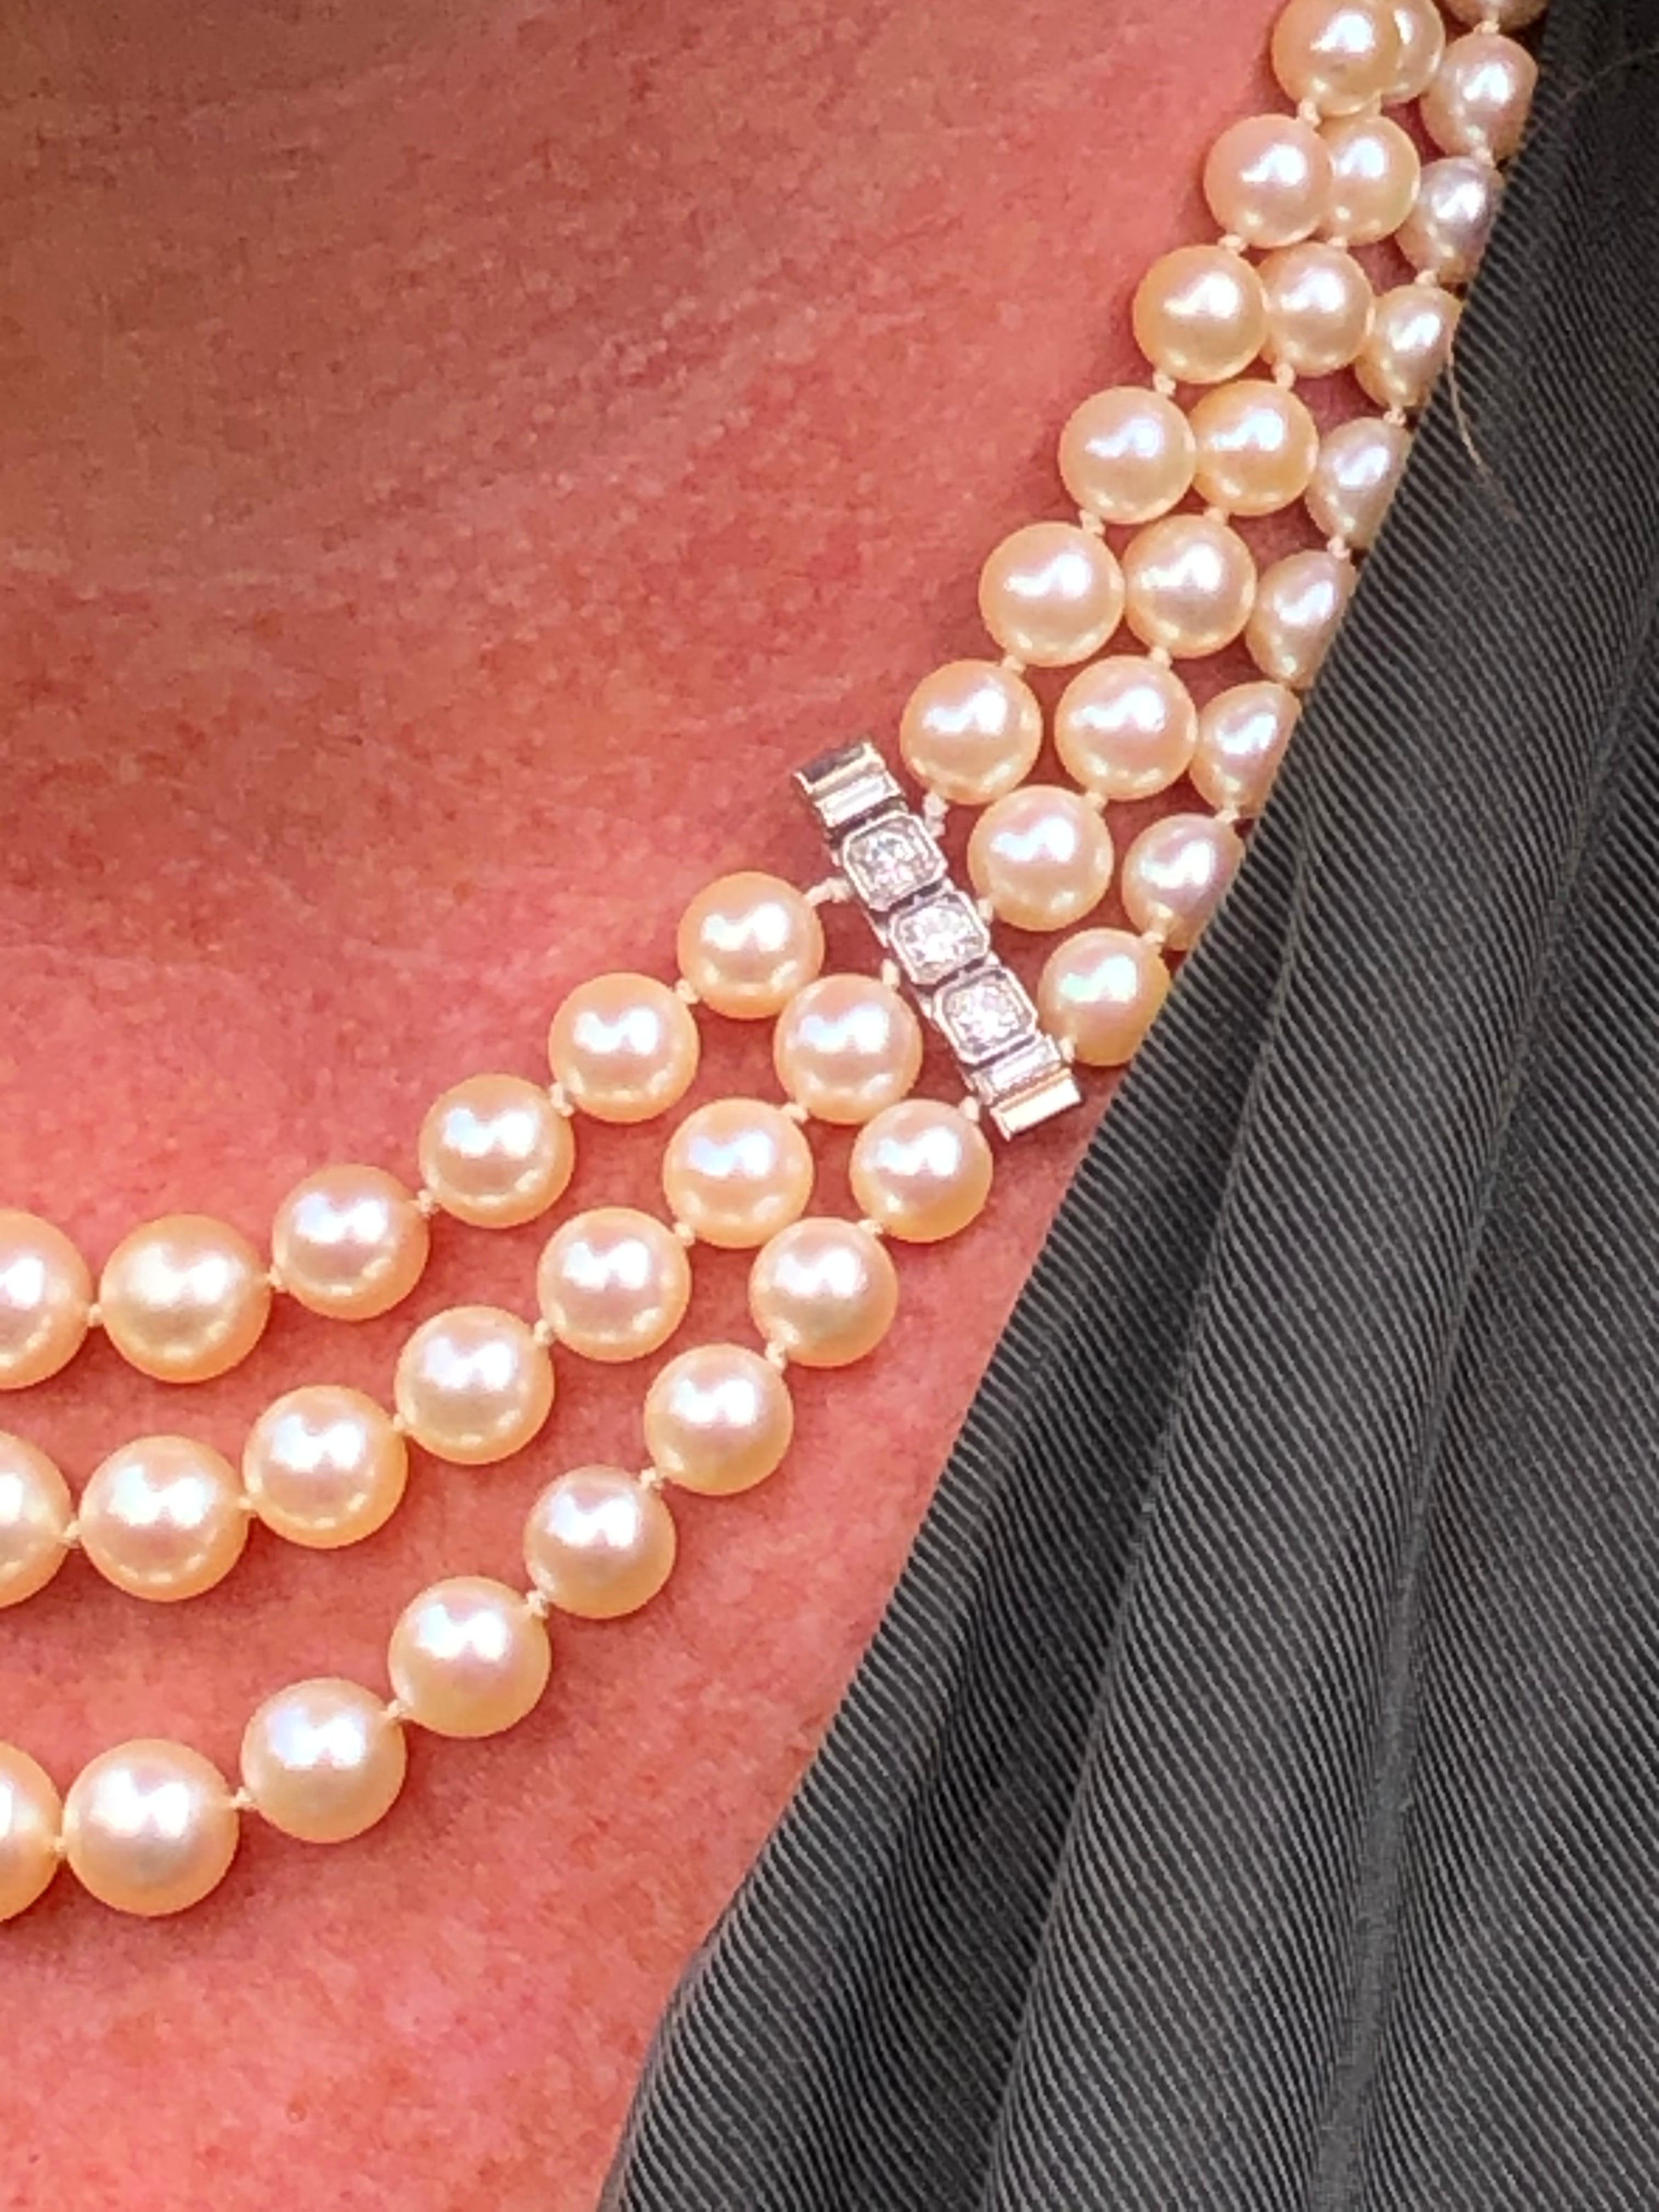 This absolutely stunning and classic triple row pearl necklace has the most exquisite emerald cut diamond clasp, spacers and it also has a French eagle hallmark and are all 18ct gold. The diamonds total to approximately 2ct in the clasp and spacers